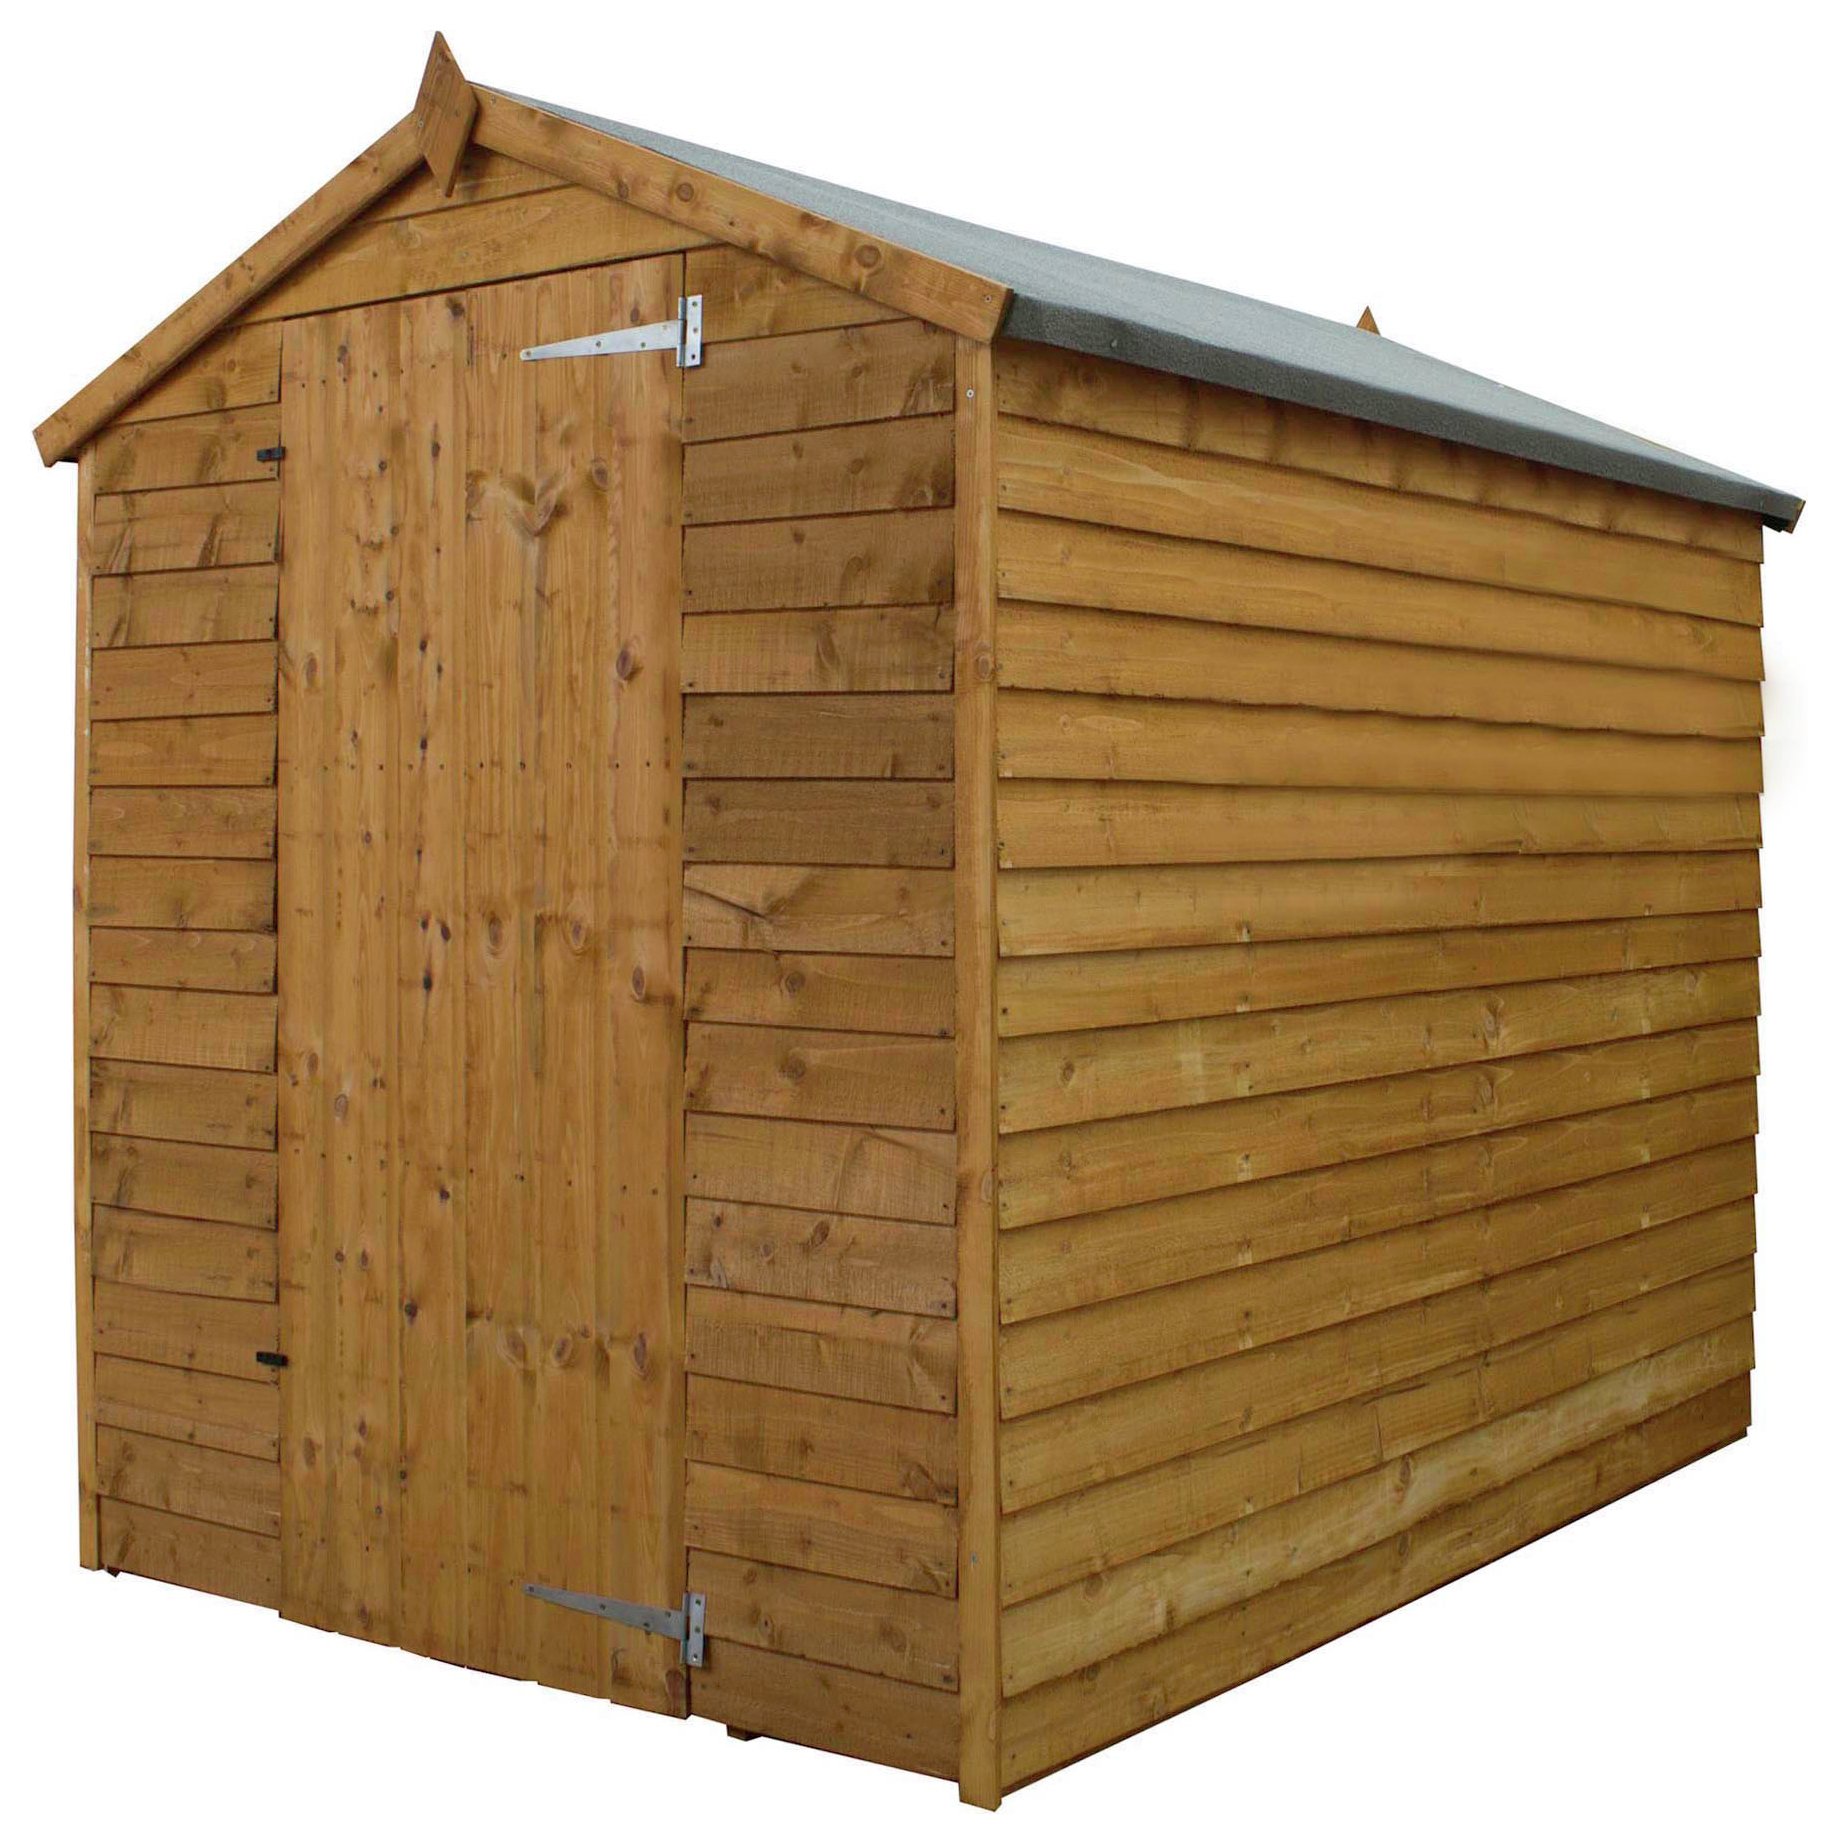 Mercia 7ft x 5ft Overlap Windowless Shed. Review